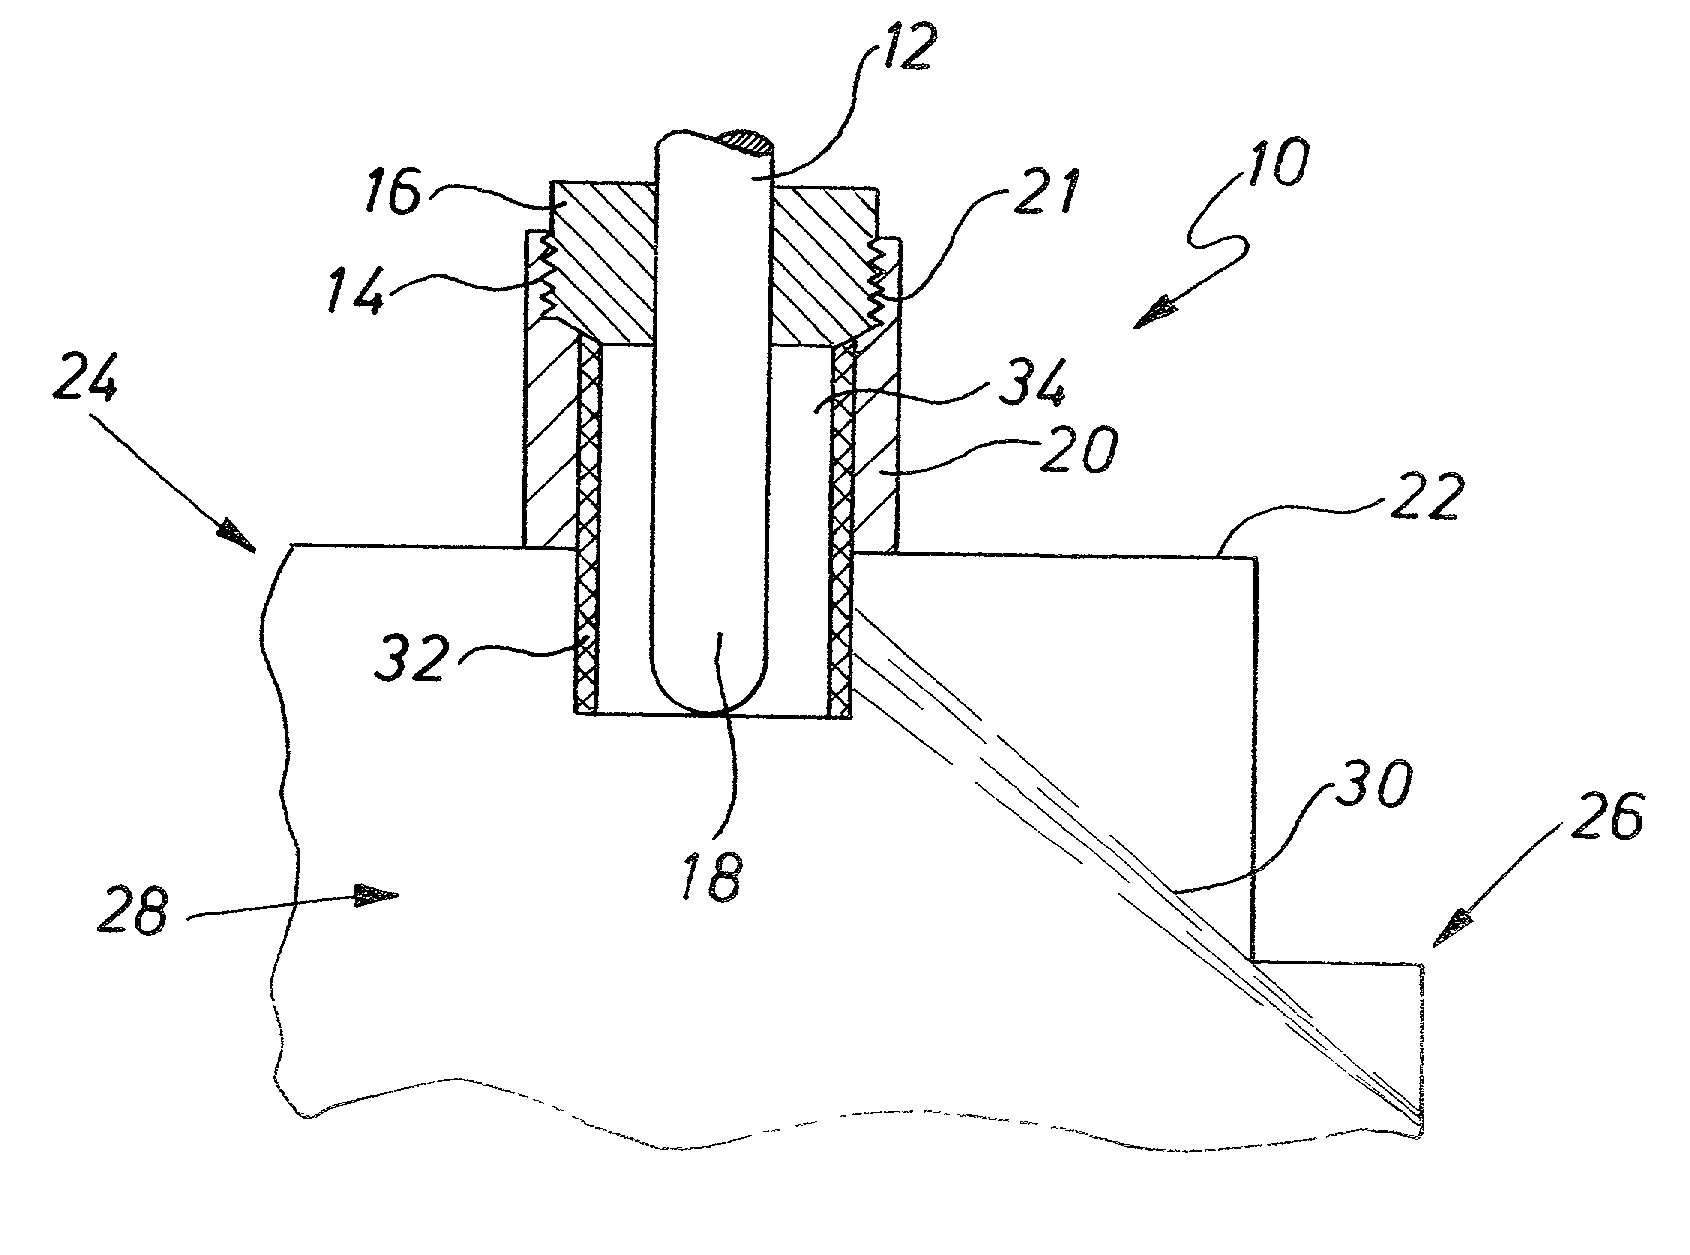 Ignition device, particularly for an atomizer burner of a motor vehicle heating appliance